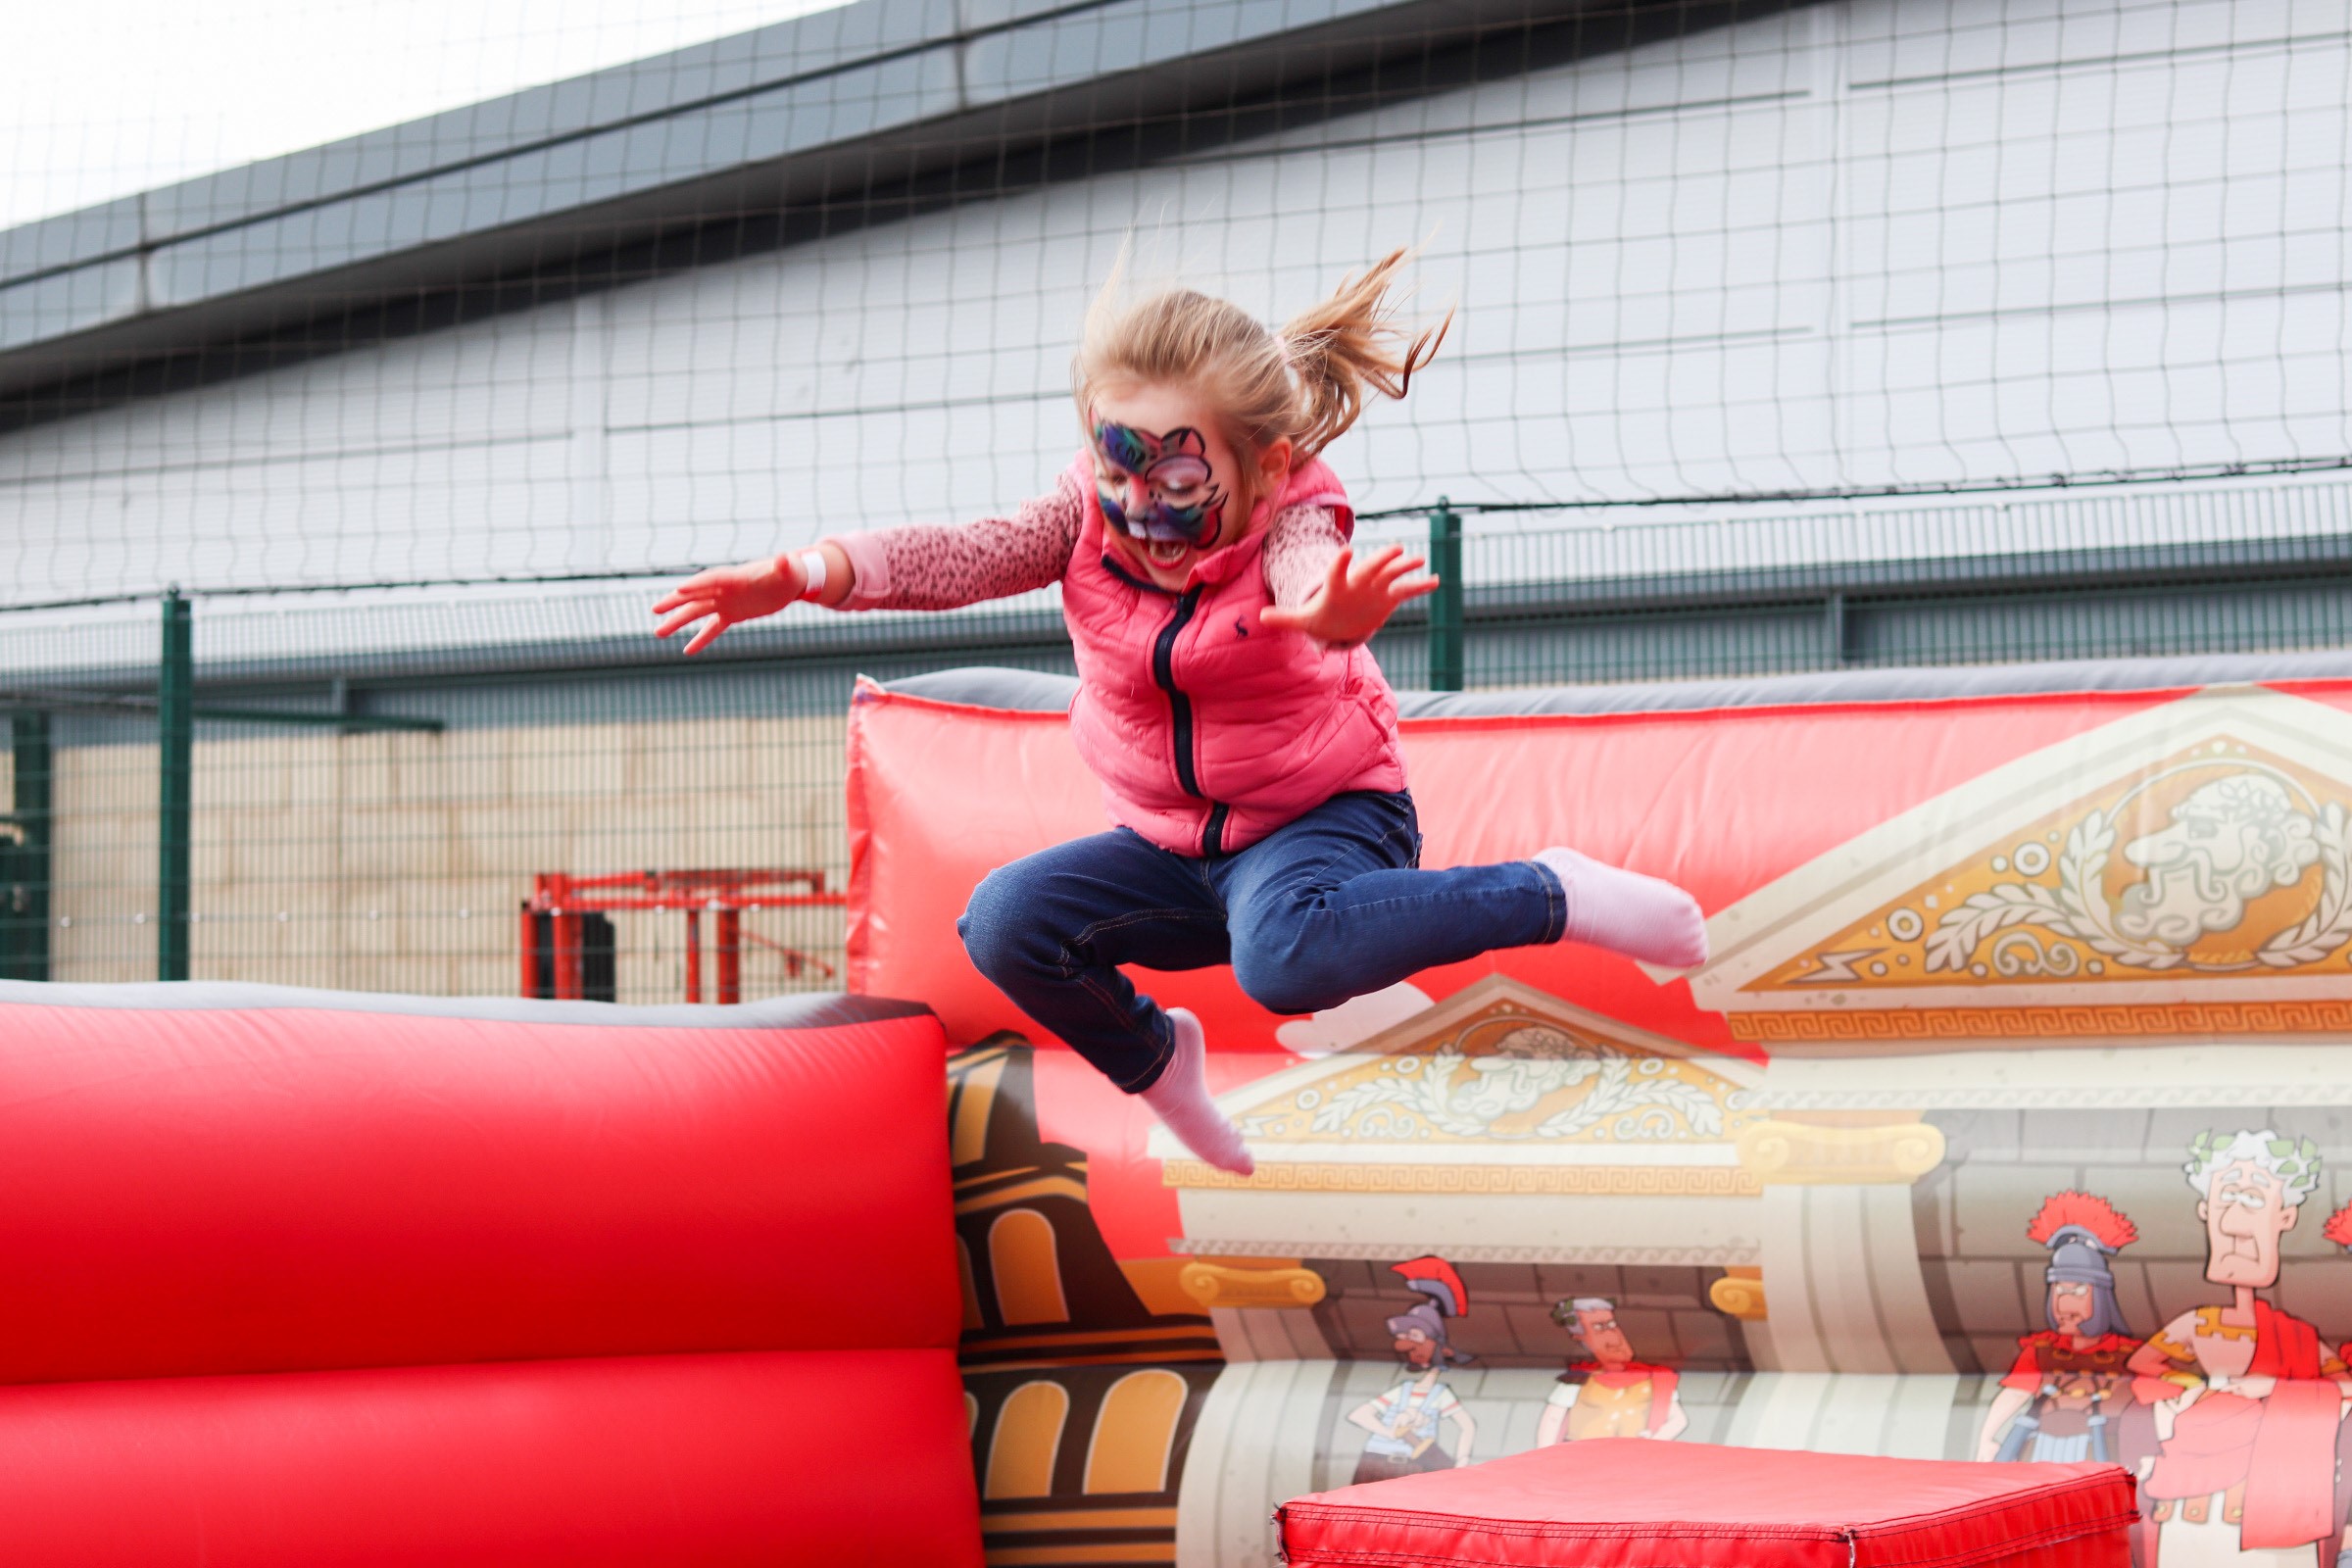 Young Girl jumping on a bouncy castle with face paint on